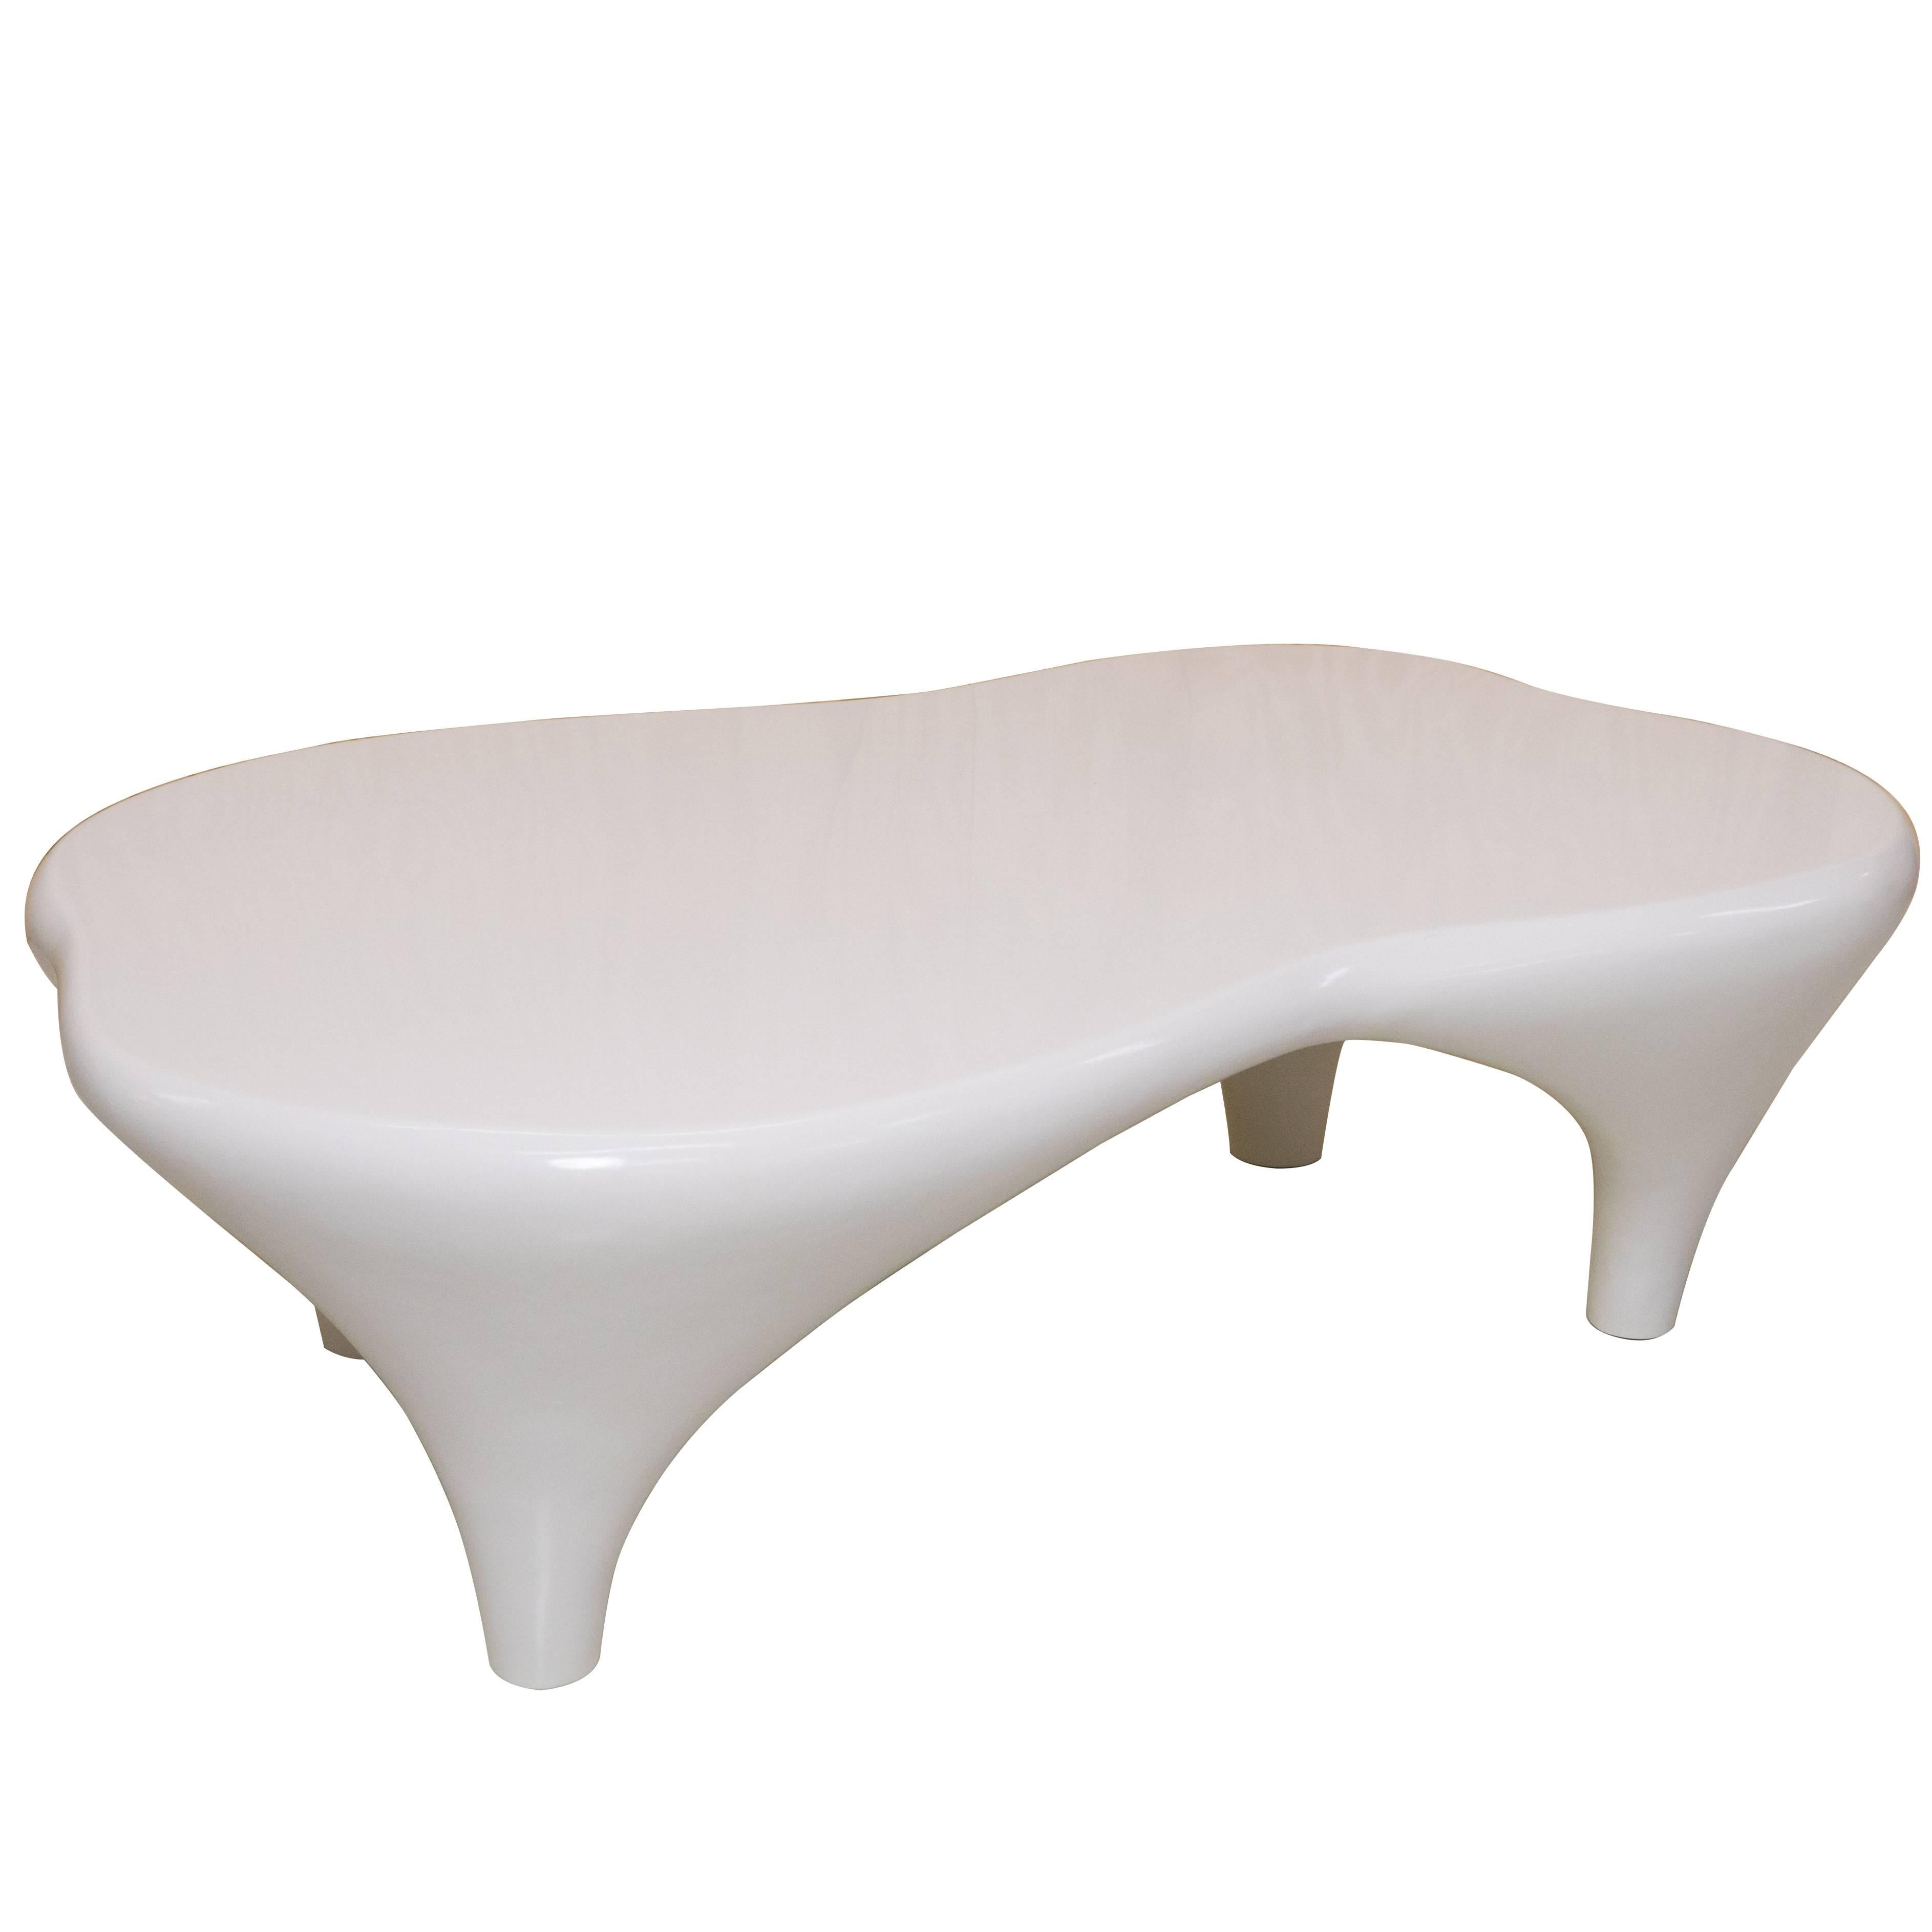 Coffee Table Sculpted by Jacques Jarrige "Toro" in White Lacquer